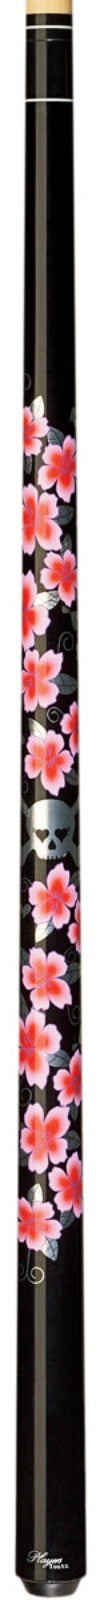 Players Y-G06-52K - Pink with Bite Pool Cue -Players